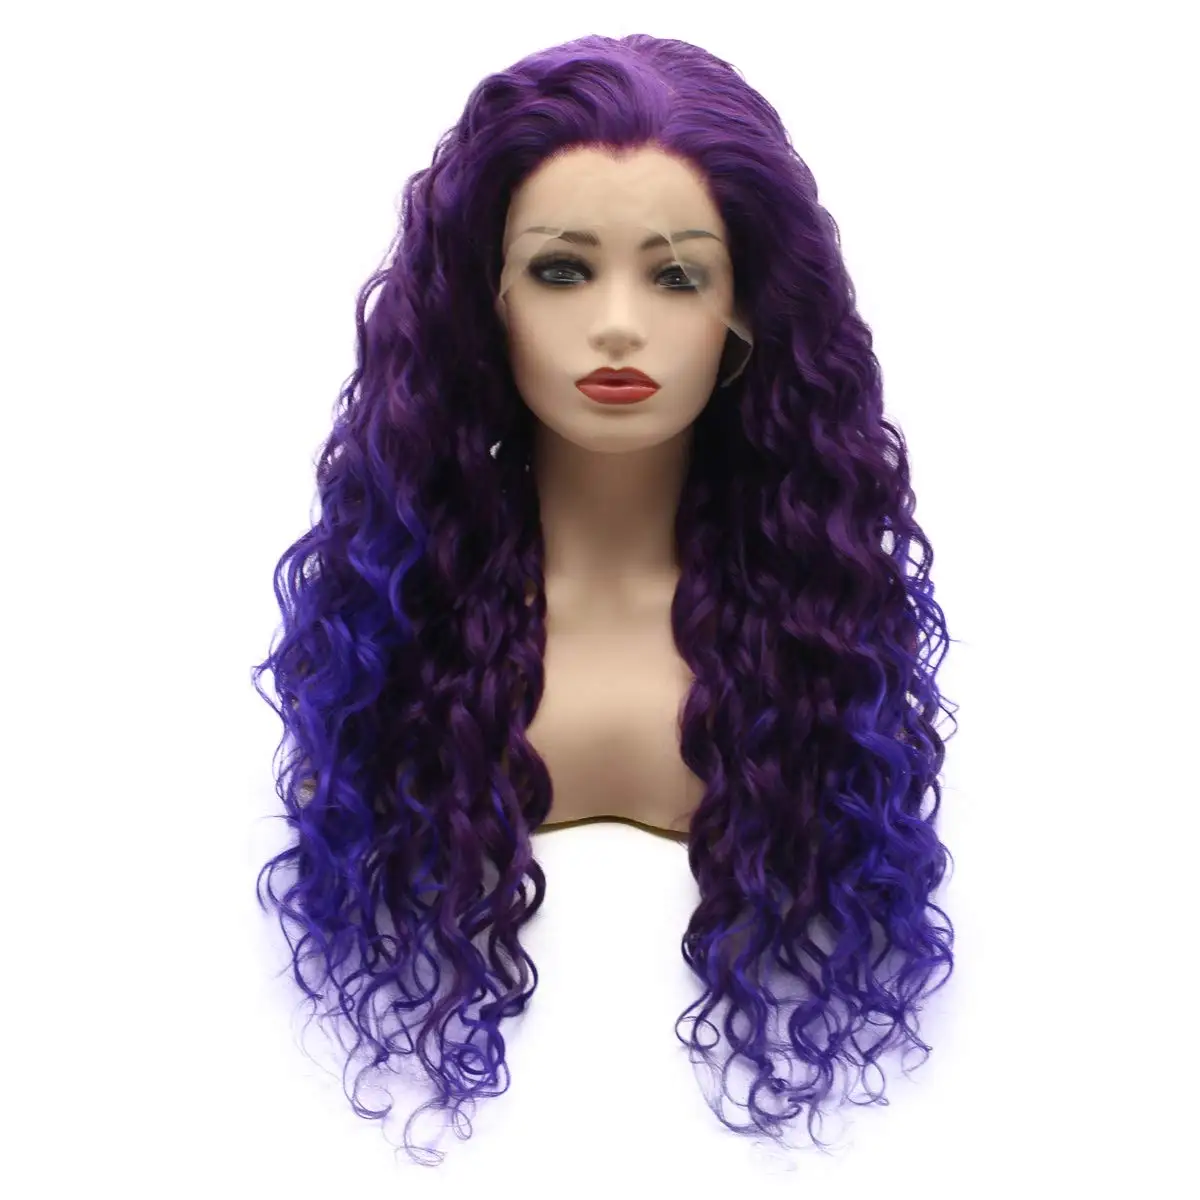 

Jeelion Hair Curly Long 26inch Purple Root Light Purple Ombre Half Hand Tied Heavy Density Synthetic Lace Front Wigs